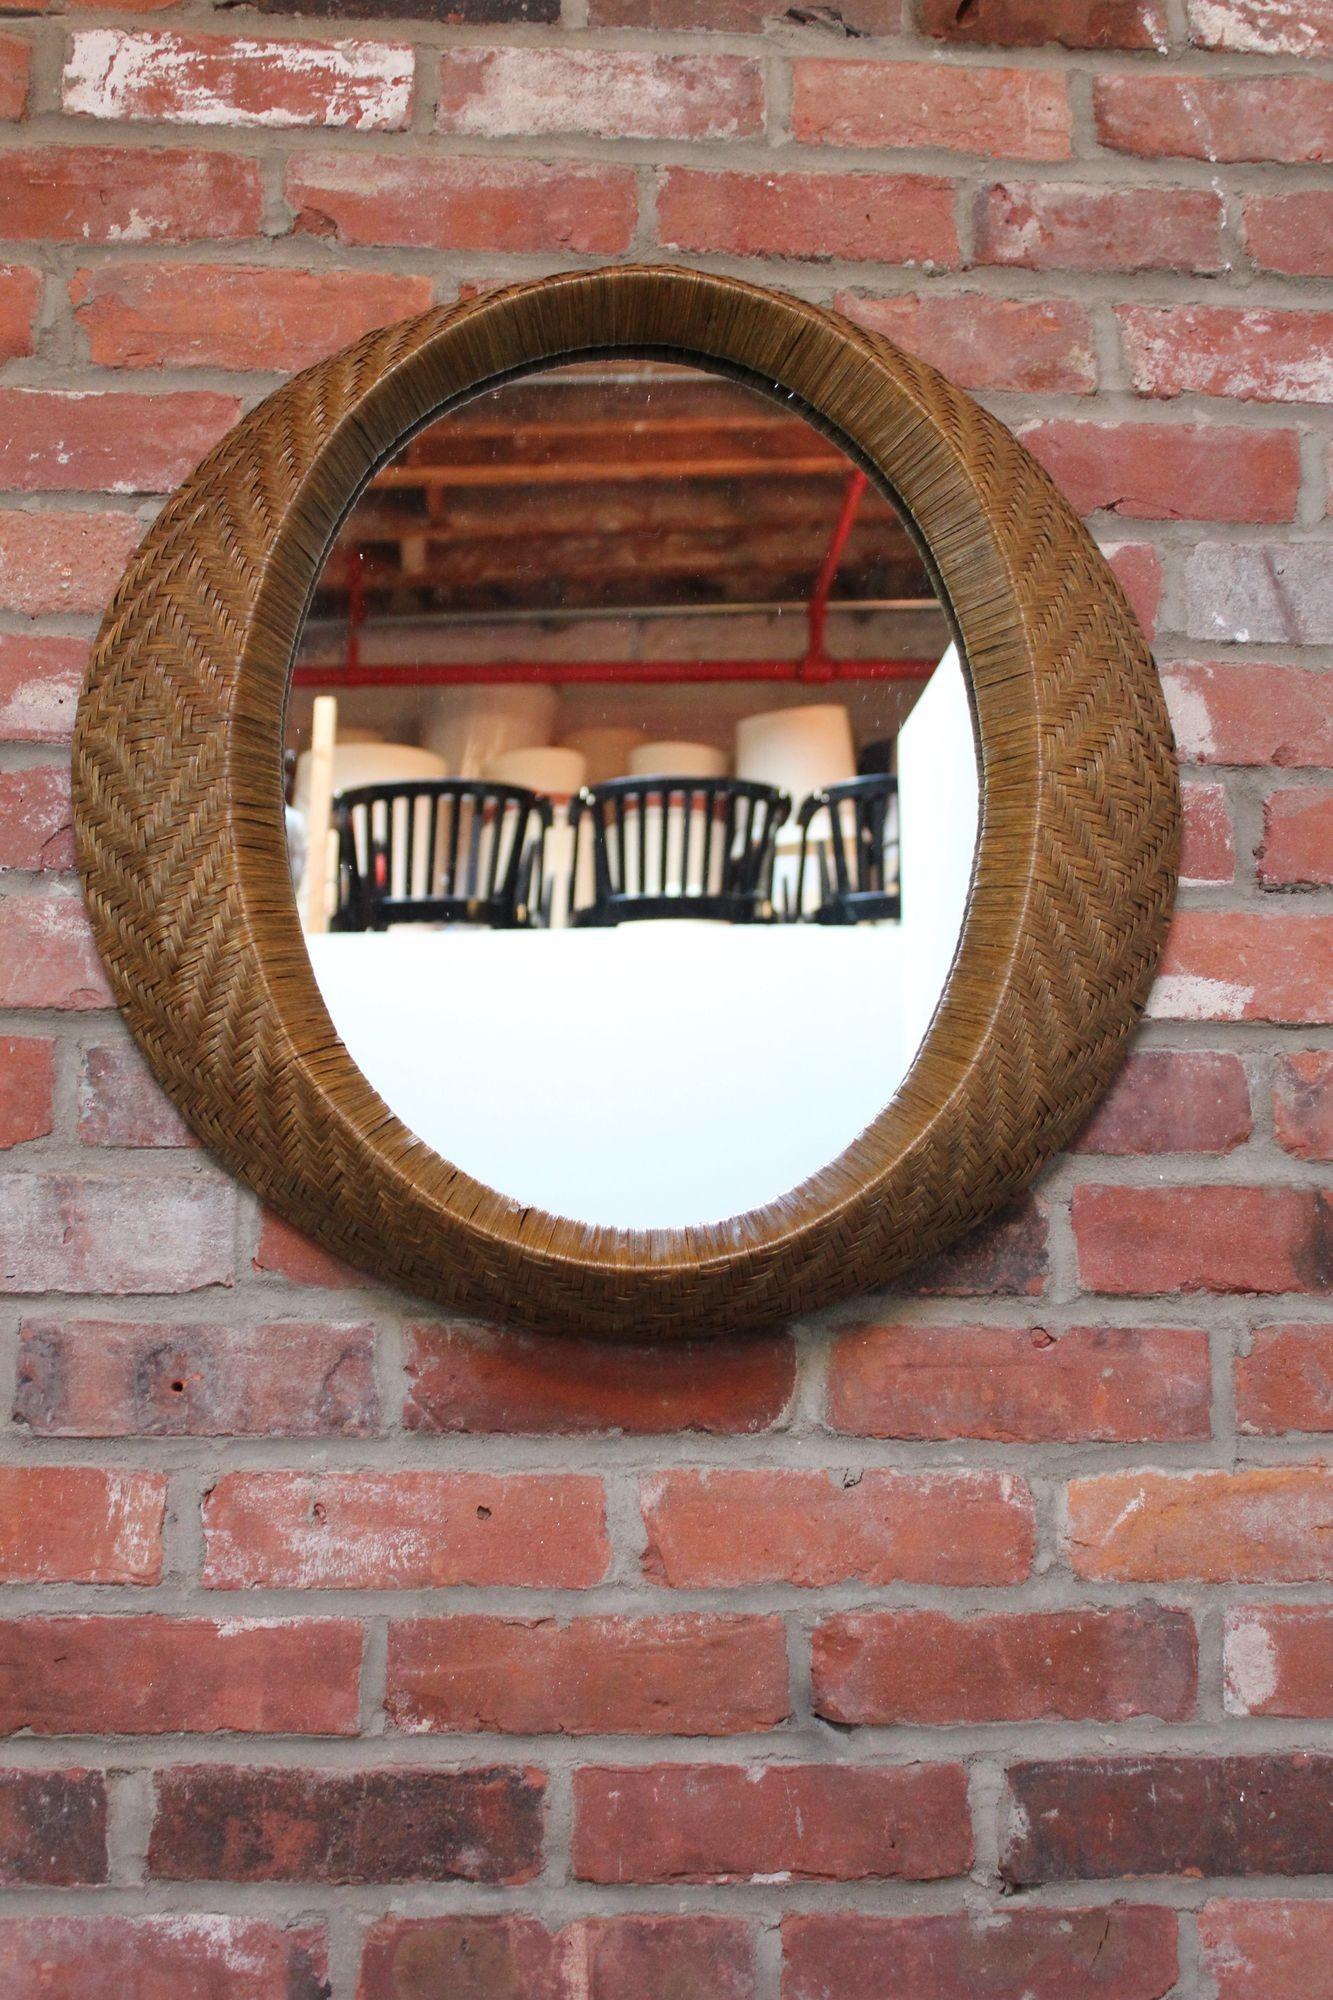 Striking, Italian-style wall mirror in stained woven rattan designed by Matt Carr for Umbra (ca. 2001, Canada).
Excellent condition with only light patina/wear to the rattan.
H: 24